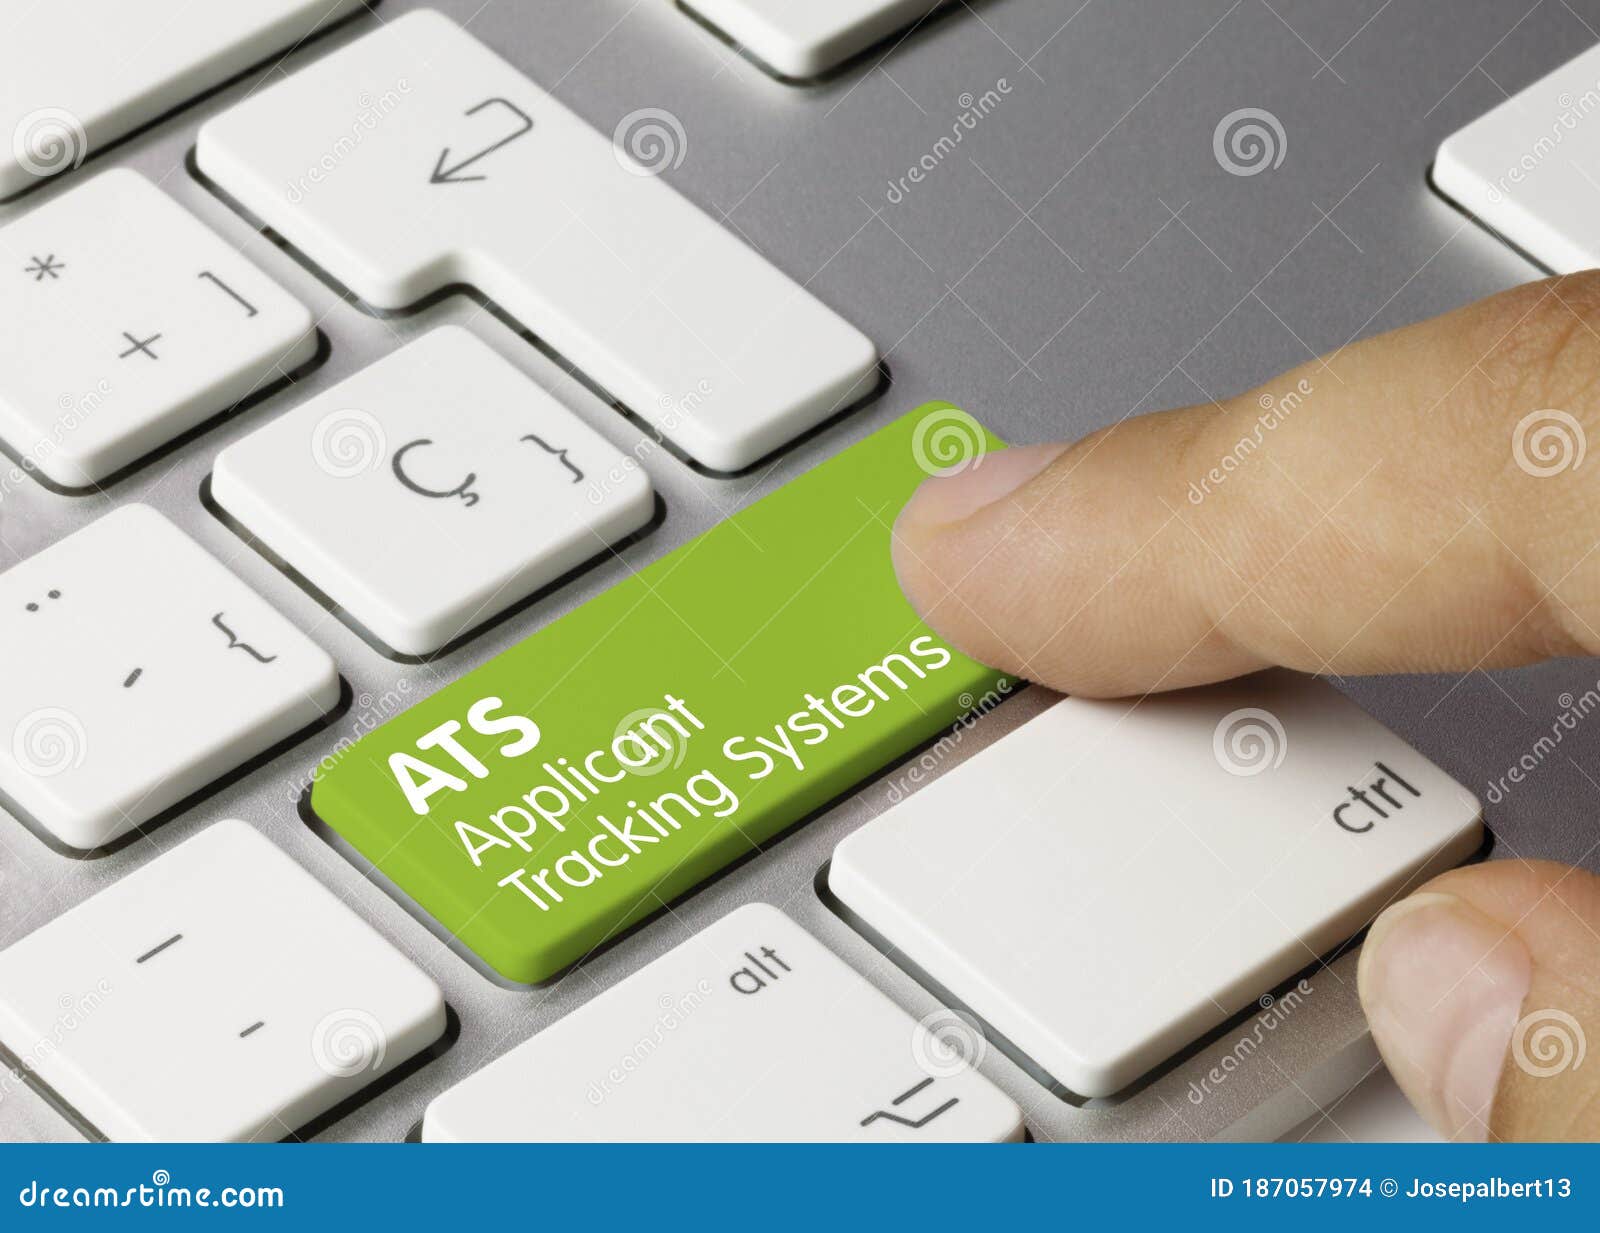 ats applicant tracking systems - inscription on green keyboard key